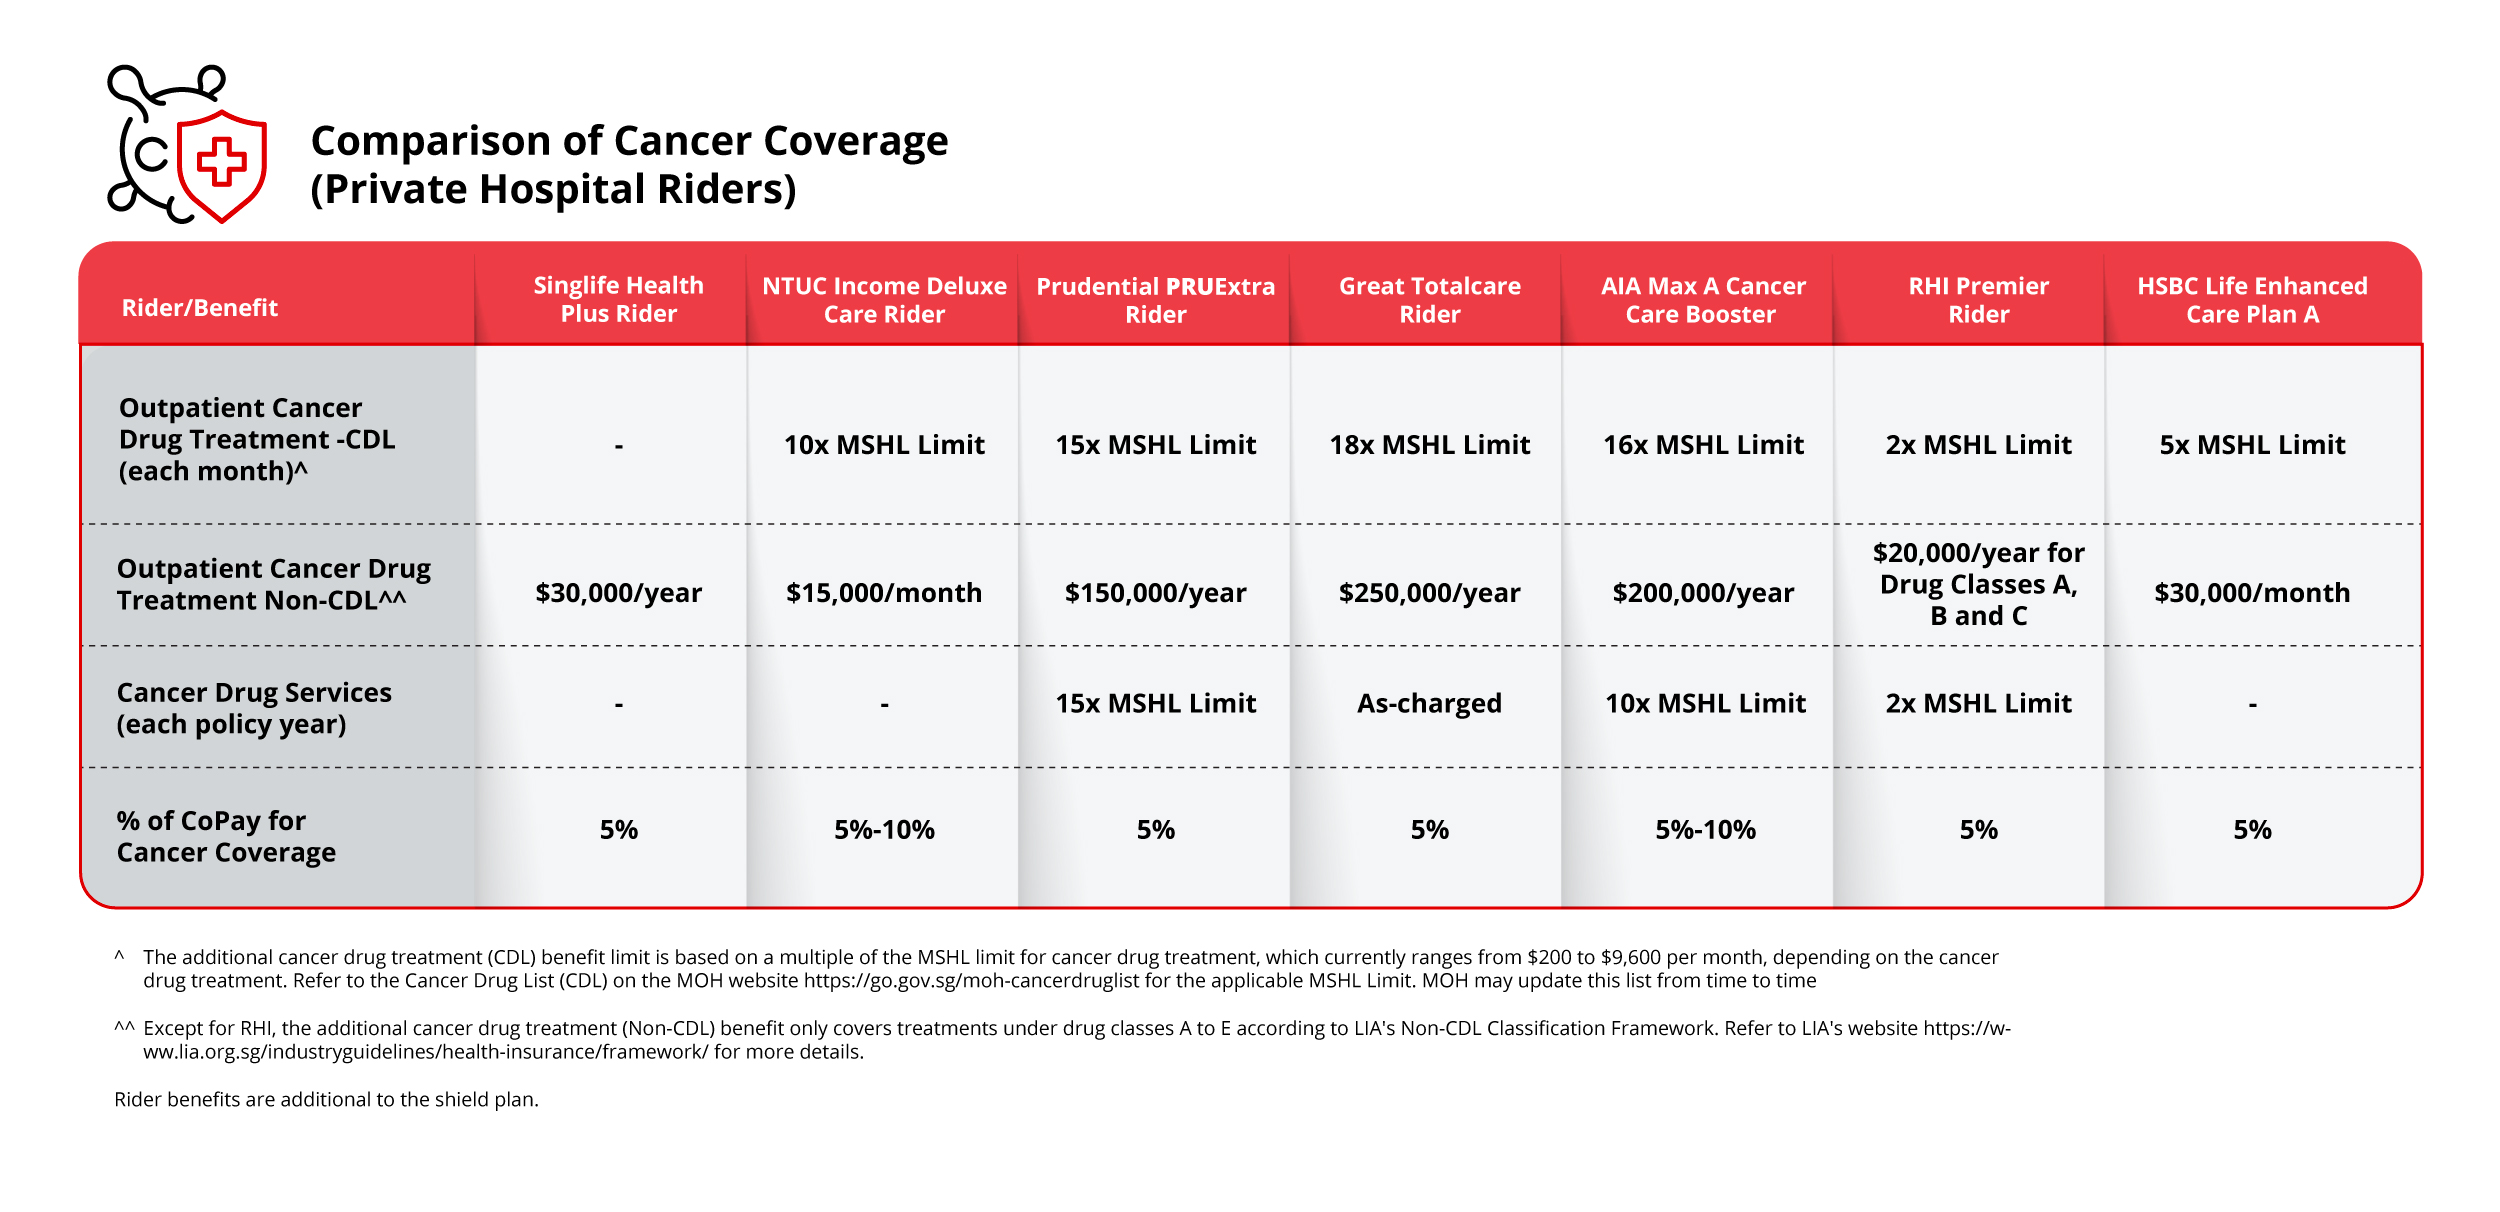 Cancer coverage changes of Integrated Shield Plans